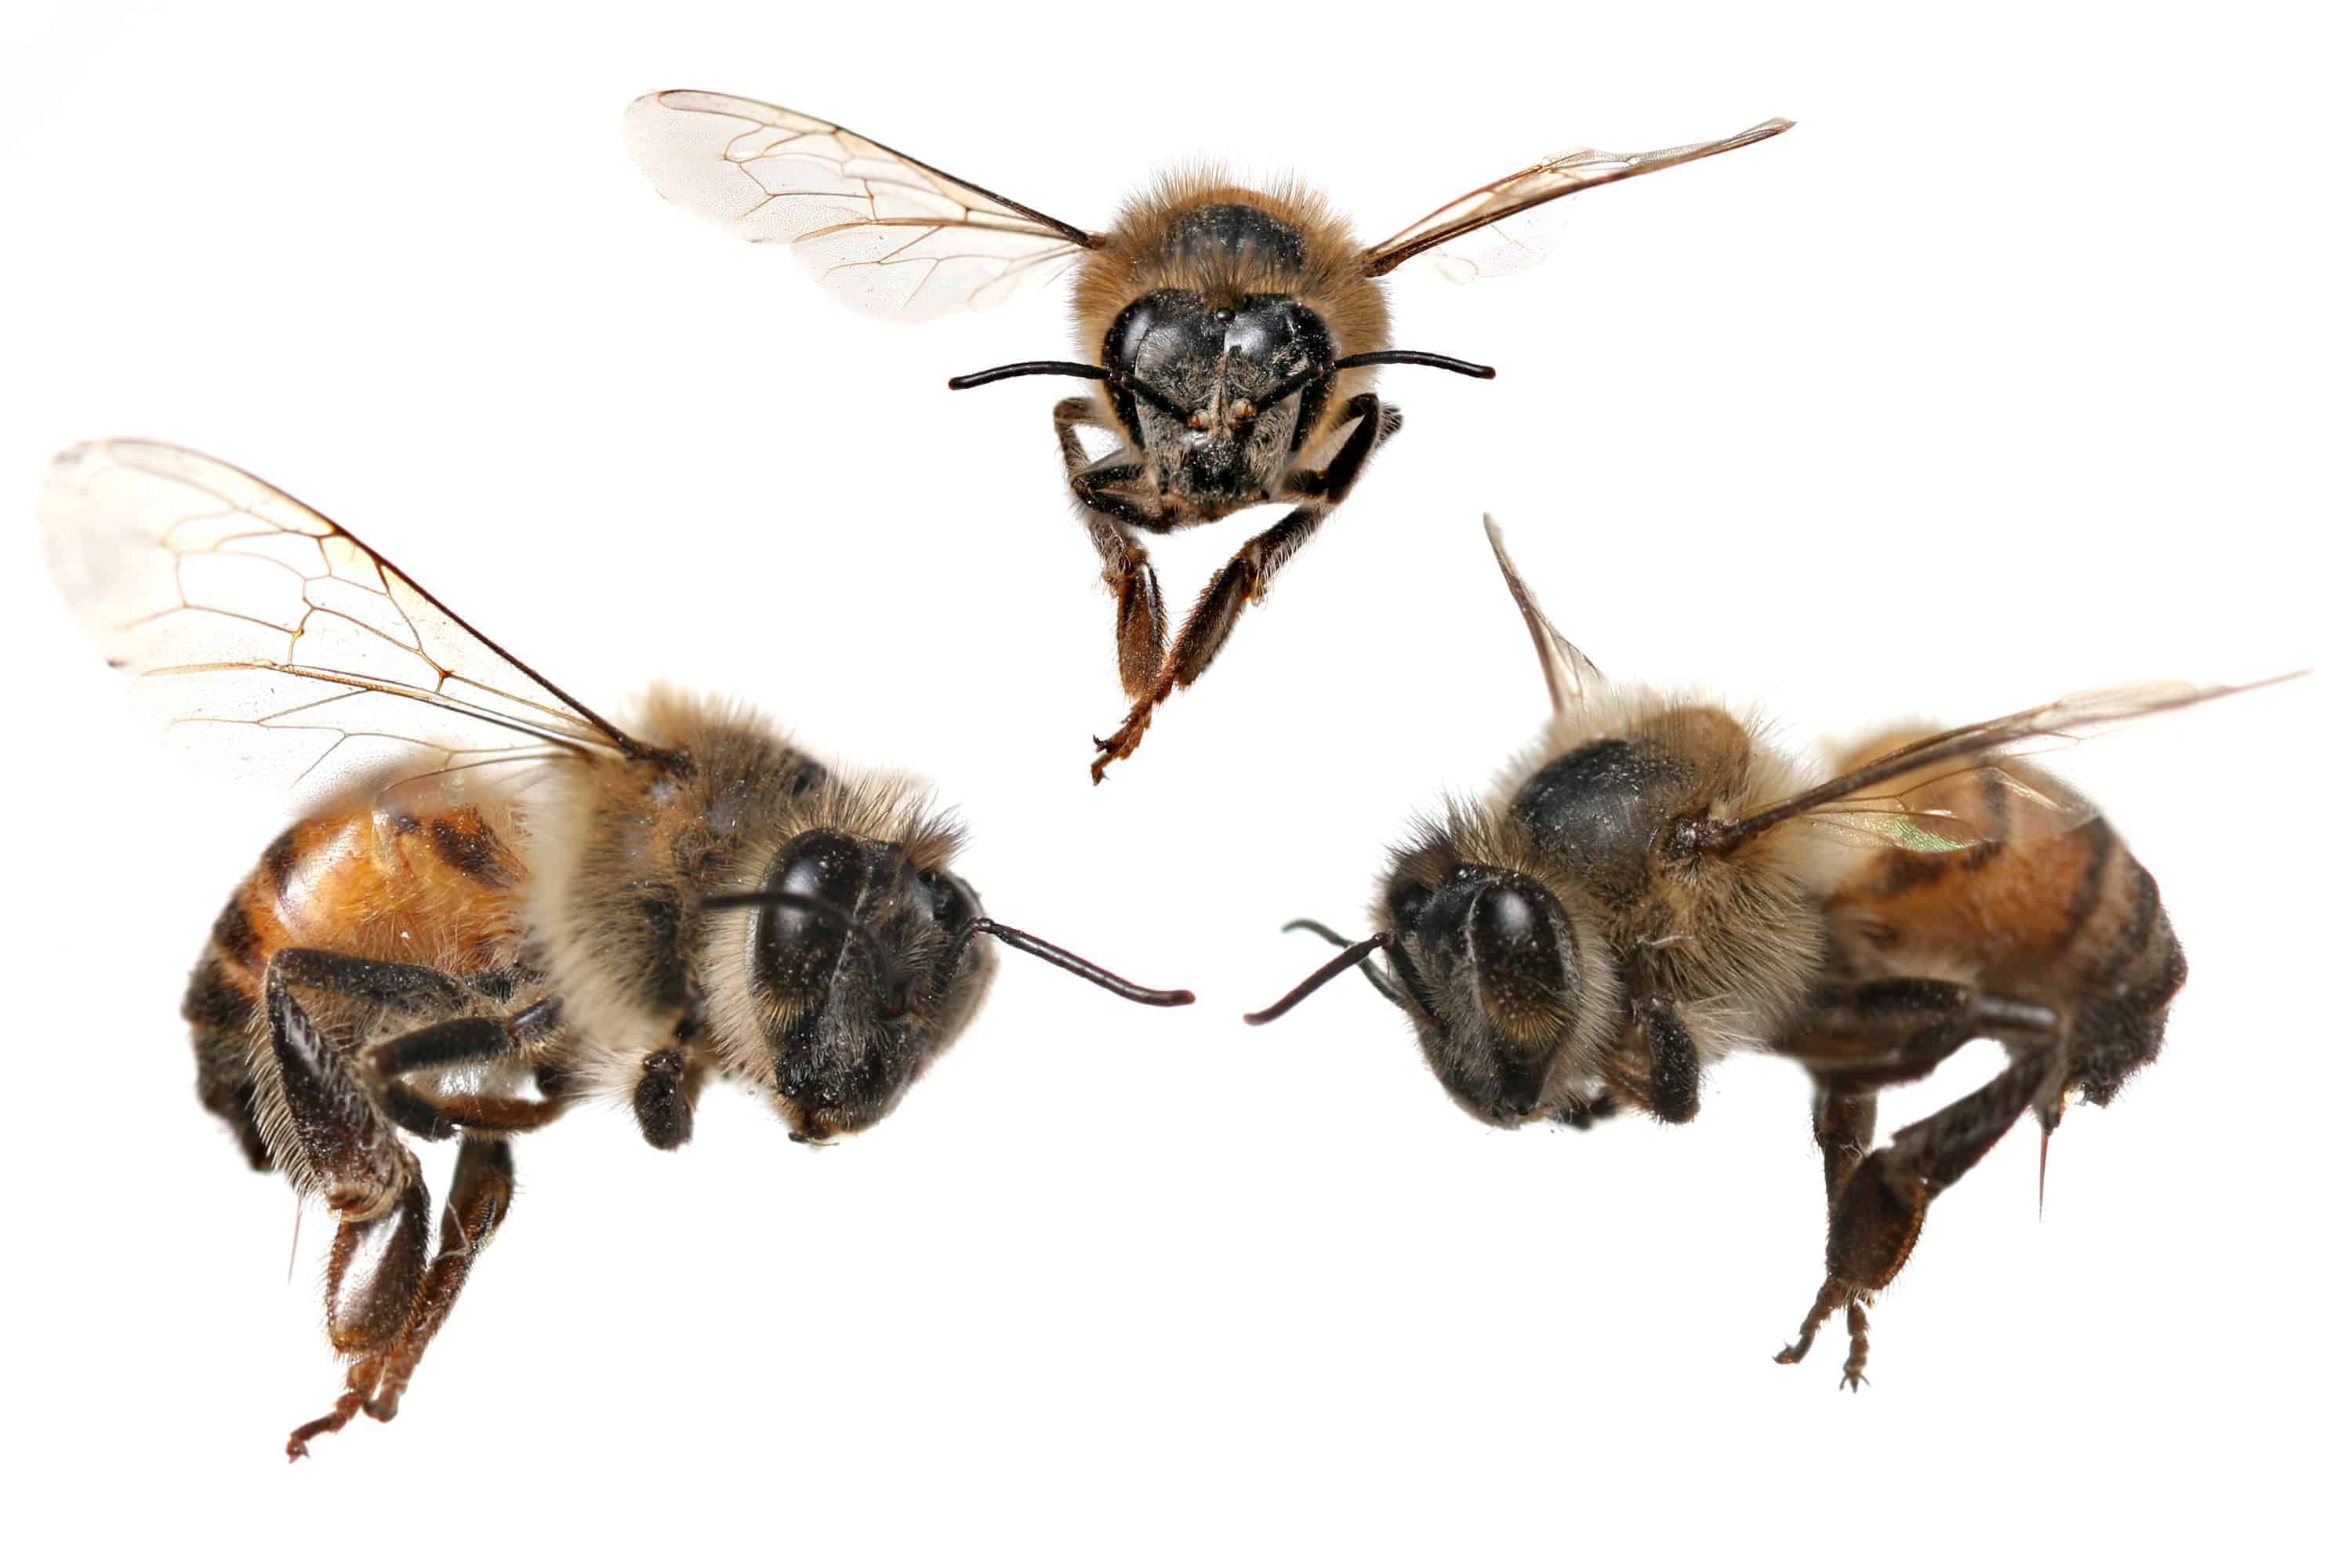 Bees facing each other